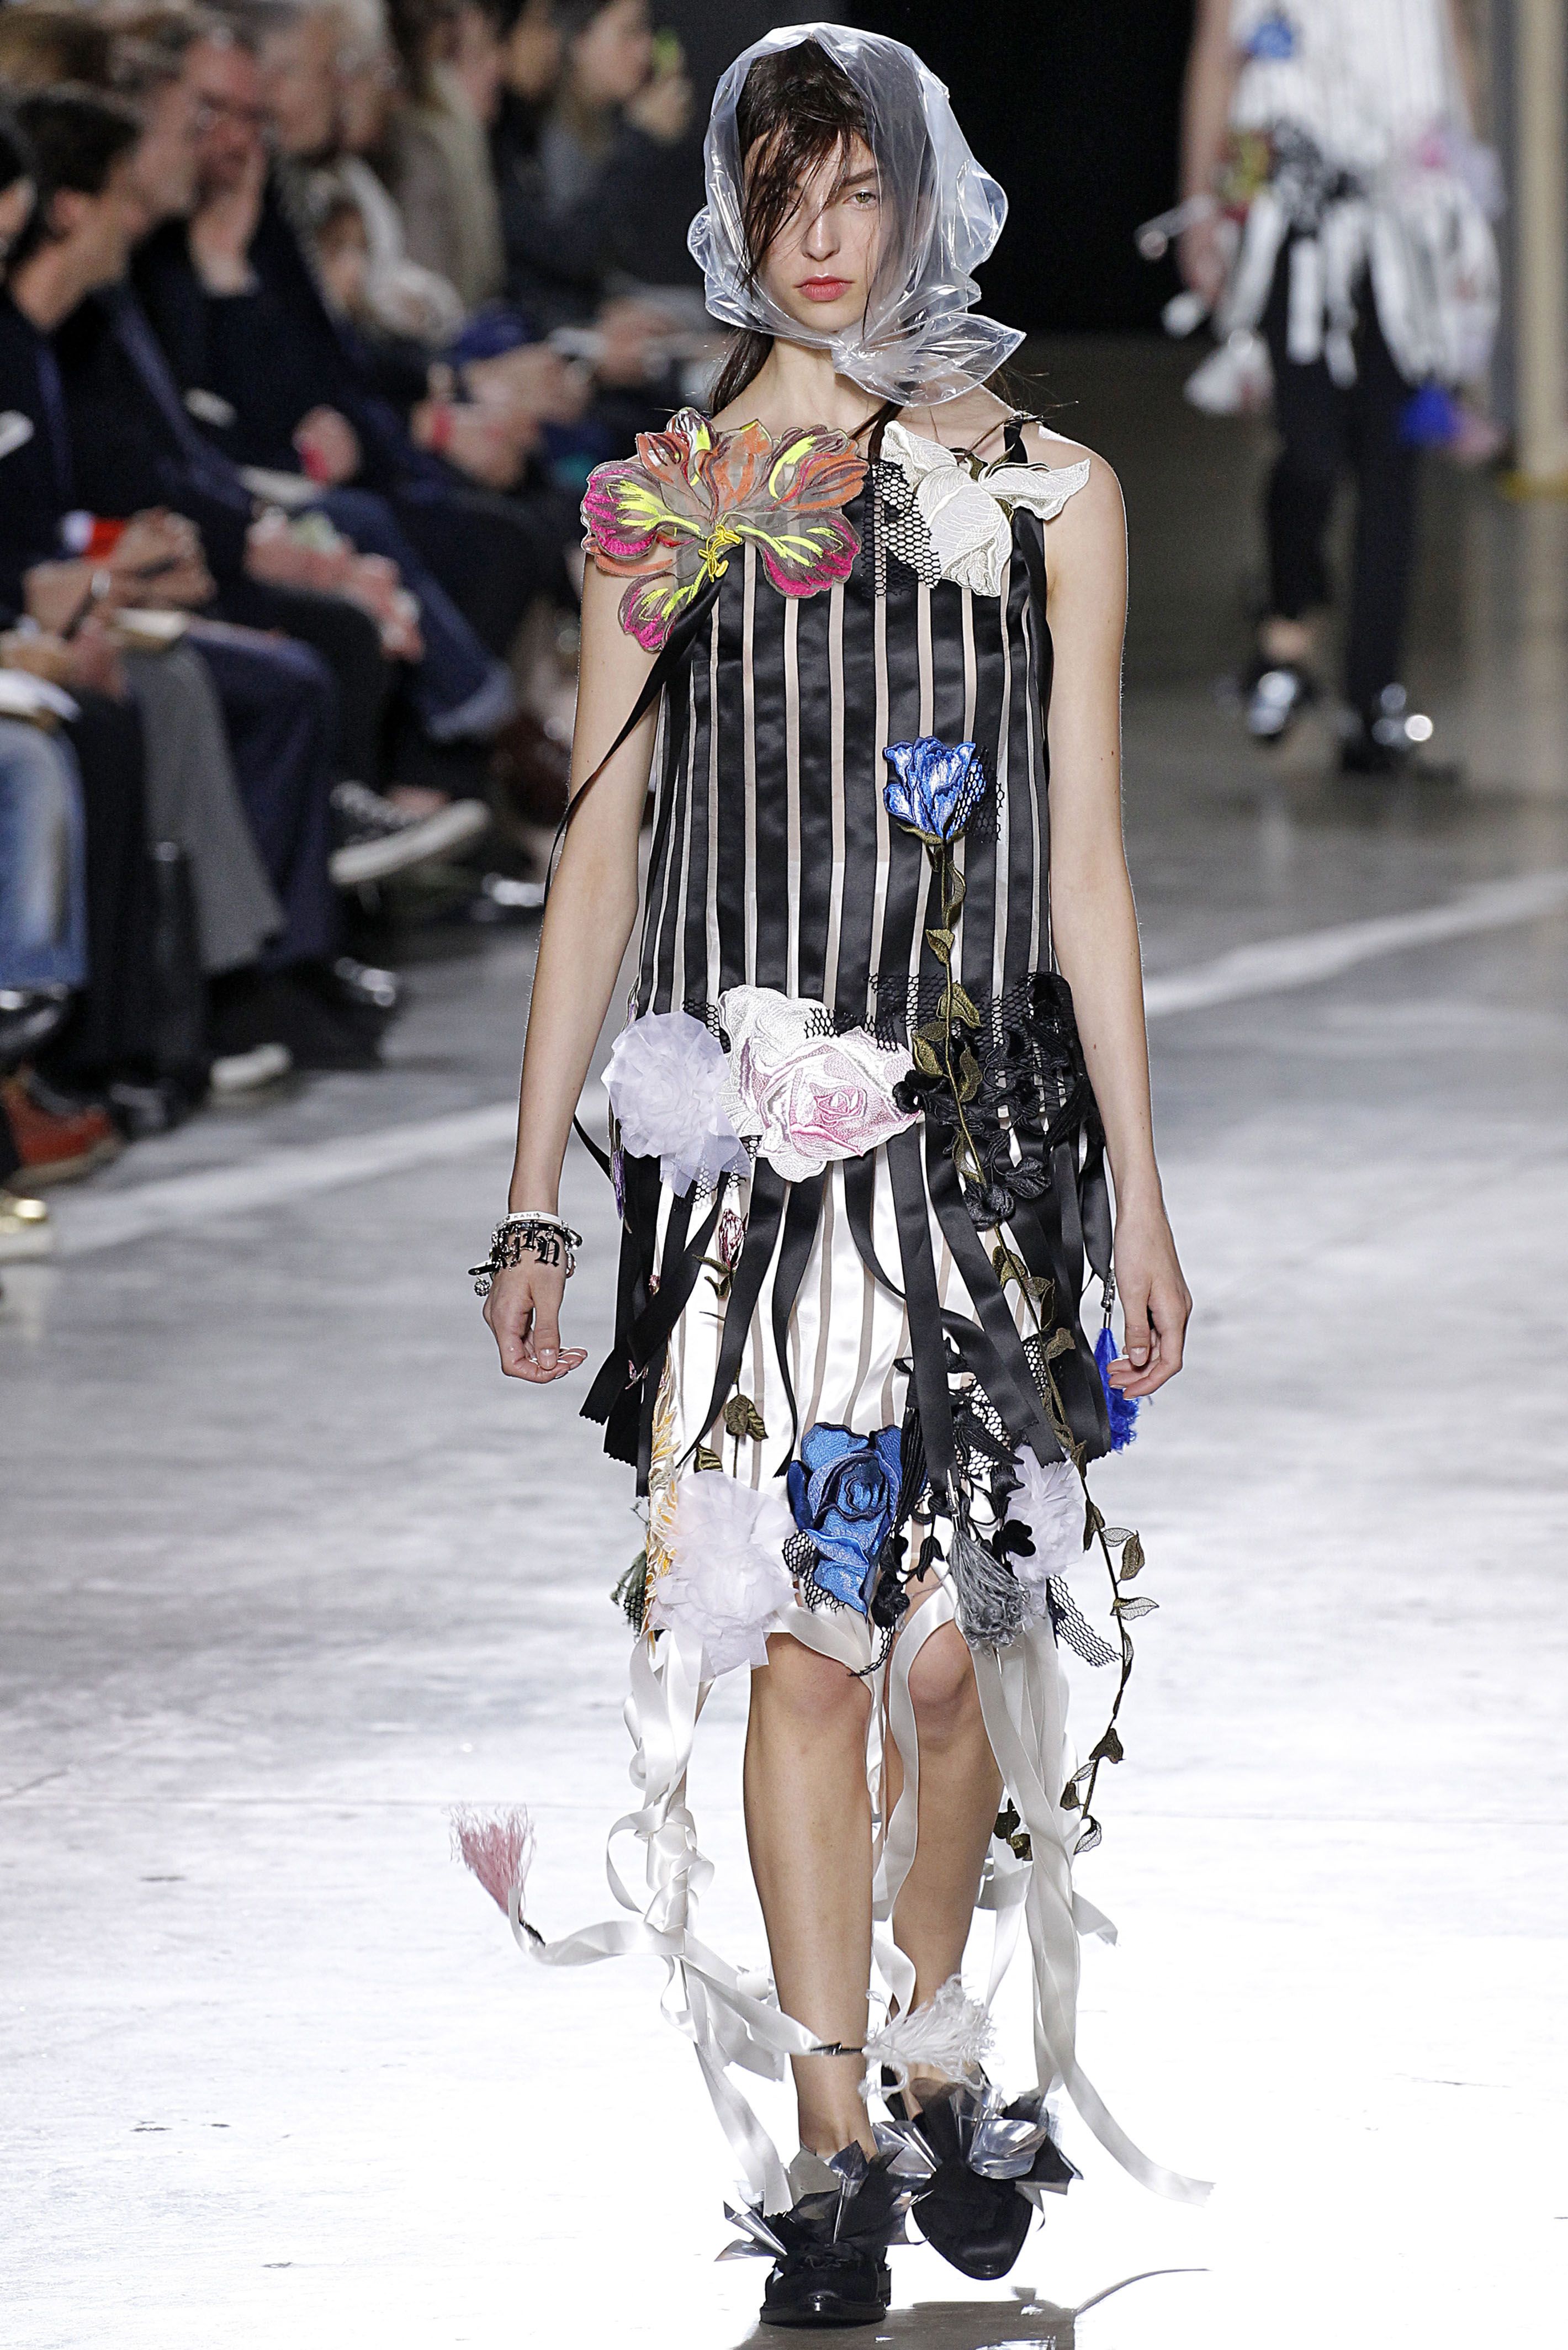 This ~Crazy~ Fashion Trend Literally Uses Trashbags As Accessories